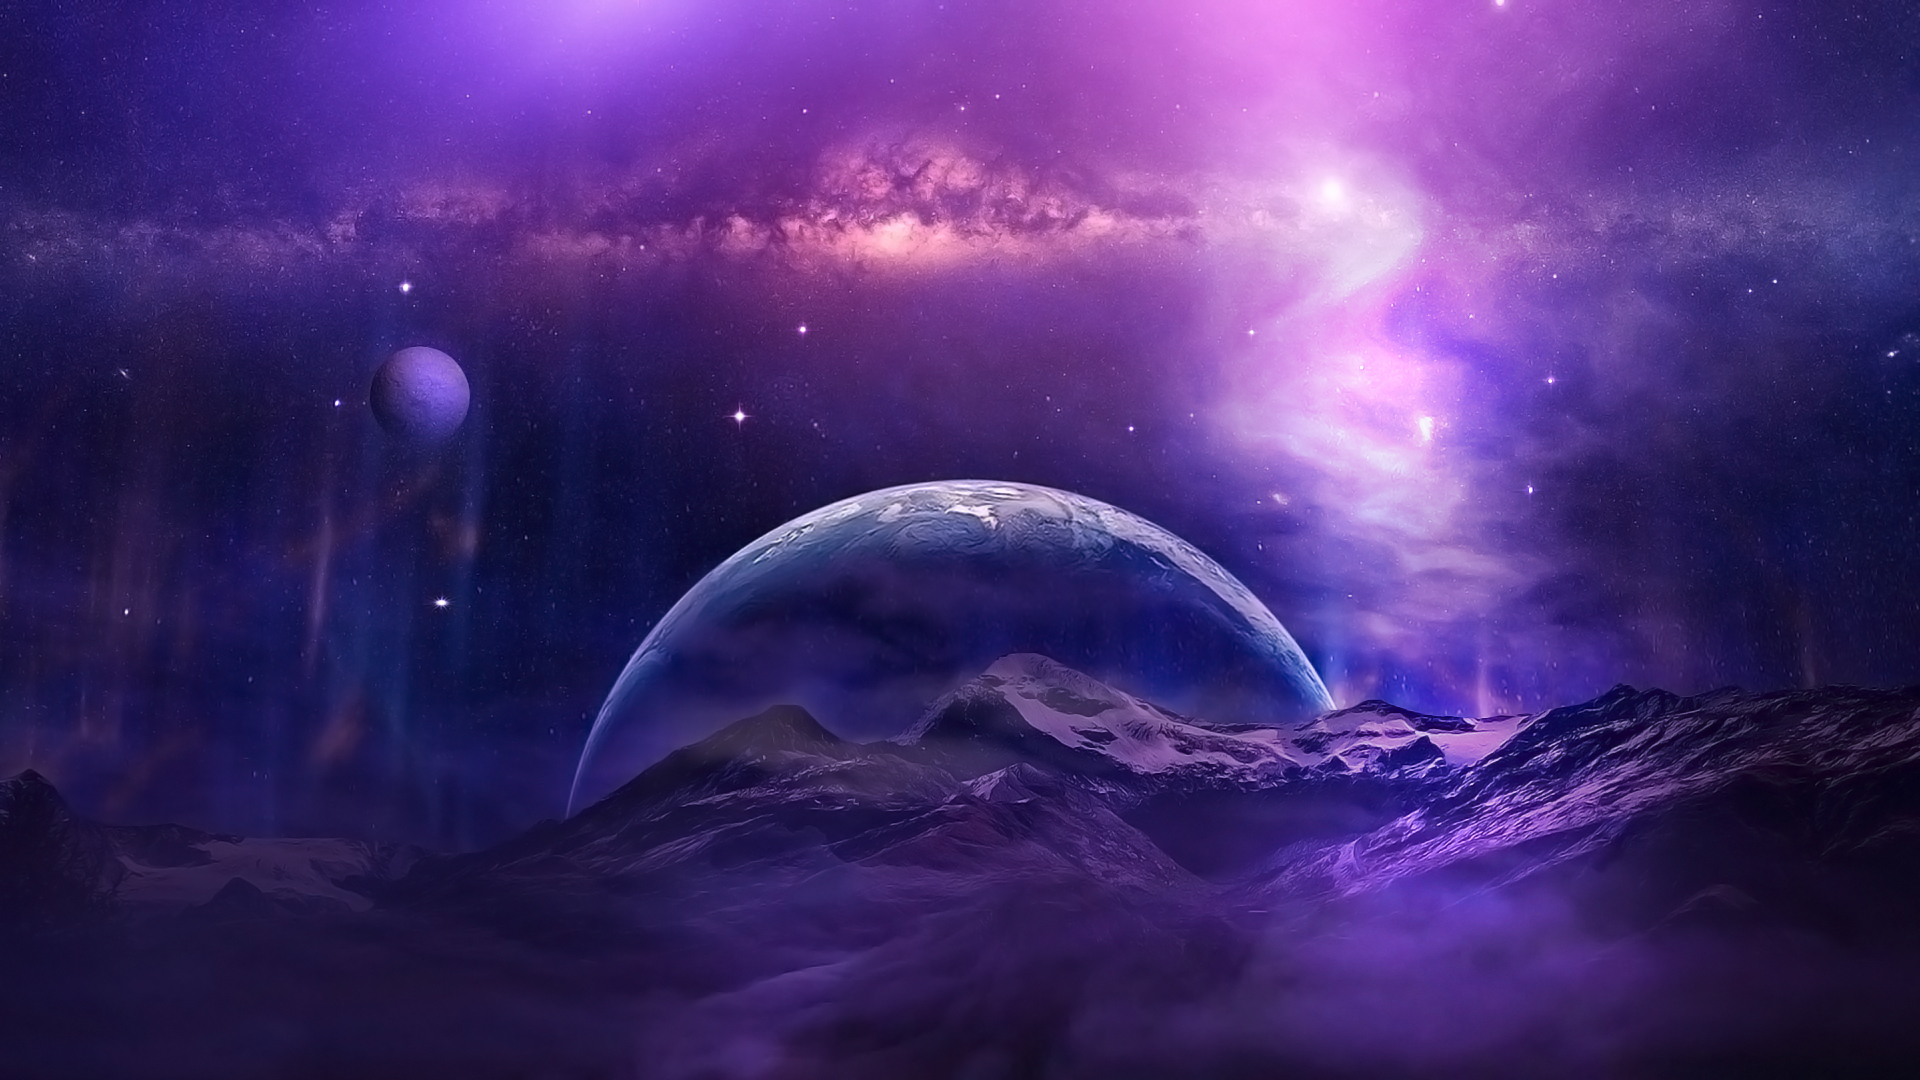 1452x1112 Mountains and Cosmo Planets 1452x1112 Resolution Wallpaper ...